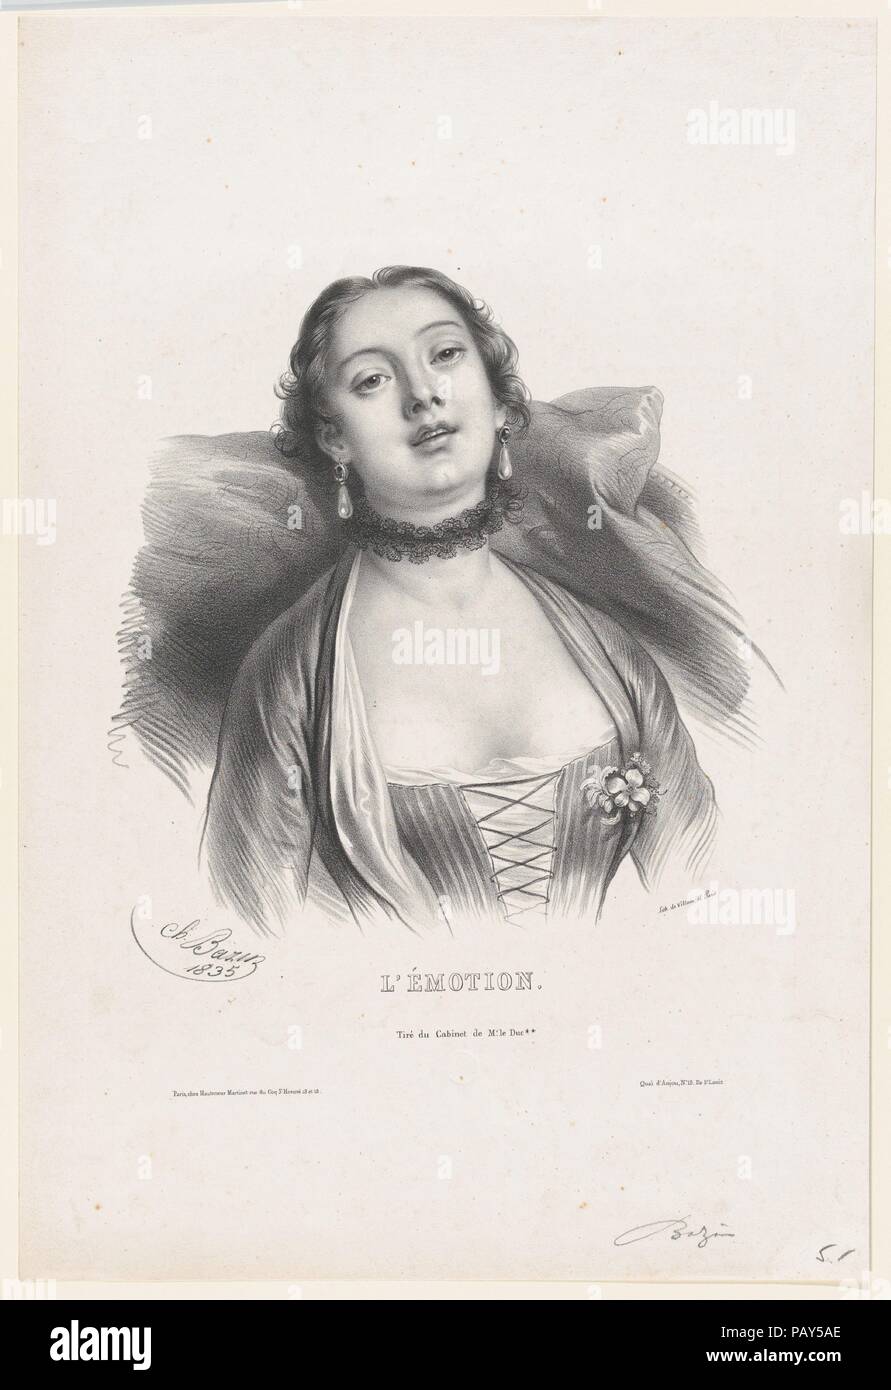 Emotion. Artist: Charles Bazin (French, Paris 1802-1859 Lyons). Dimensions: Image: 10 1/4 × 9 13/16 in. (26 × 25 cm)  Sheet: 17 11/16 × 11 15/16 in. (45 × 30.3 cm). Lithographer: Villain (French, active 1822-53). Date: 1853. Museum: Metropolitan Museum of Art, New York, USA. Stock Photo